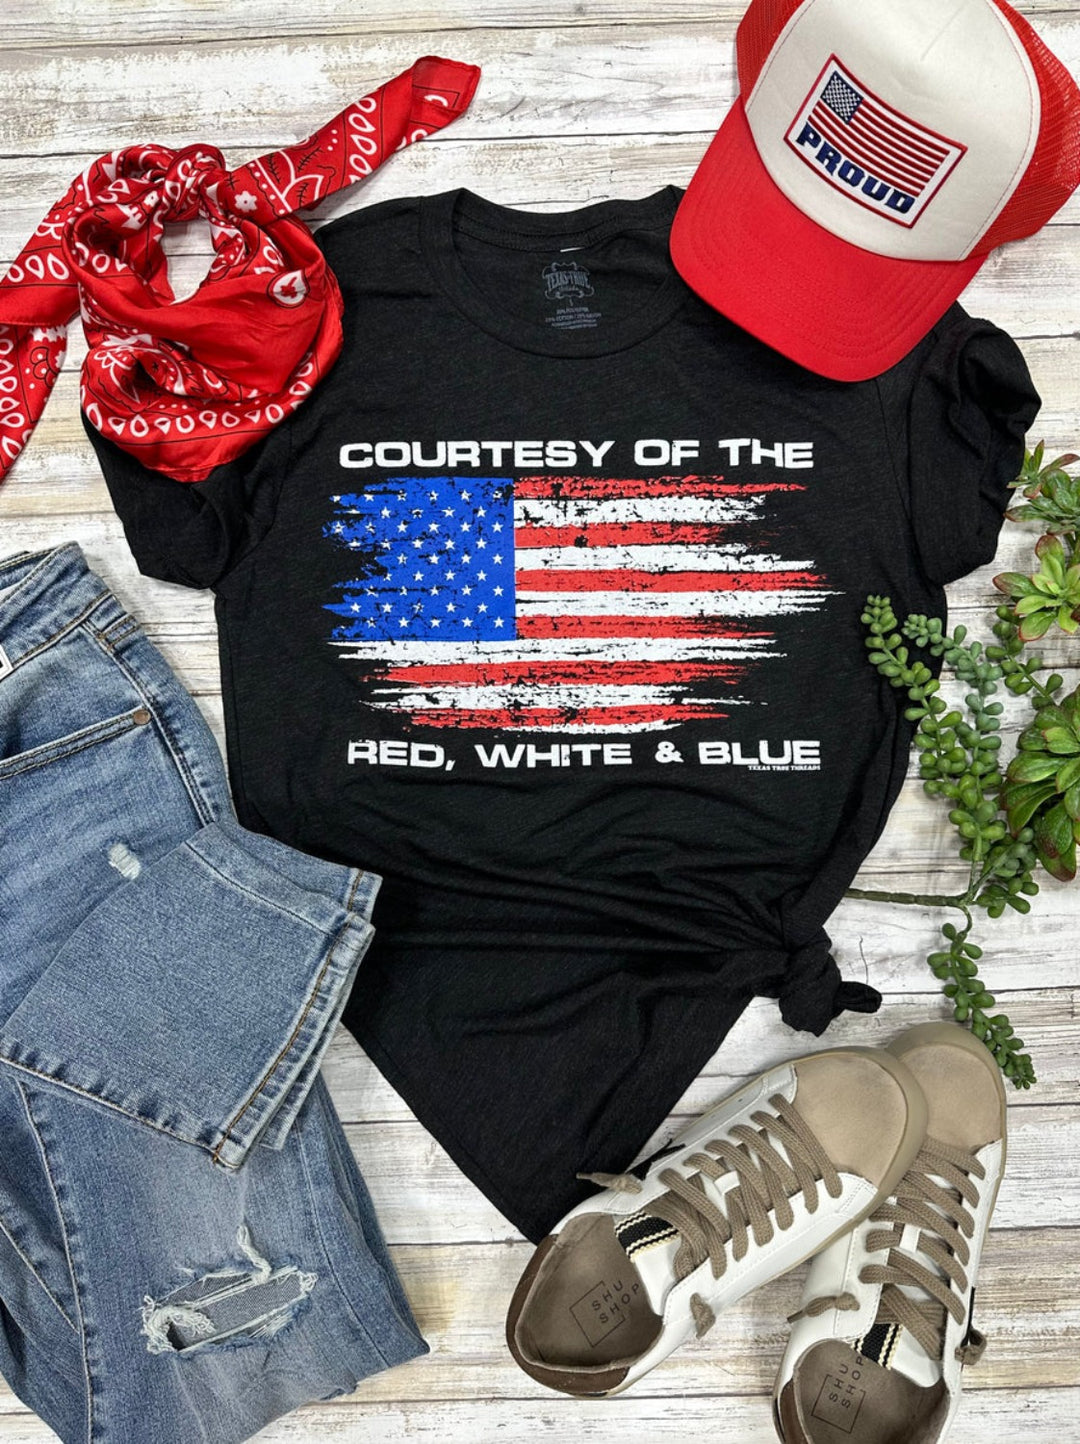 Courtesy of the Red, White & Blue Graphic Tee by Texas True Threads